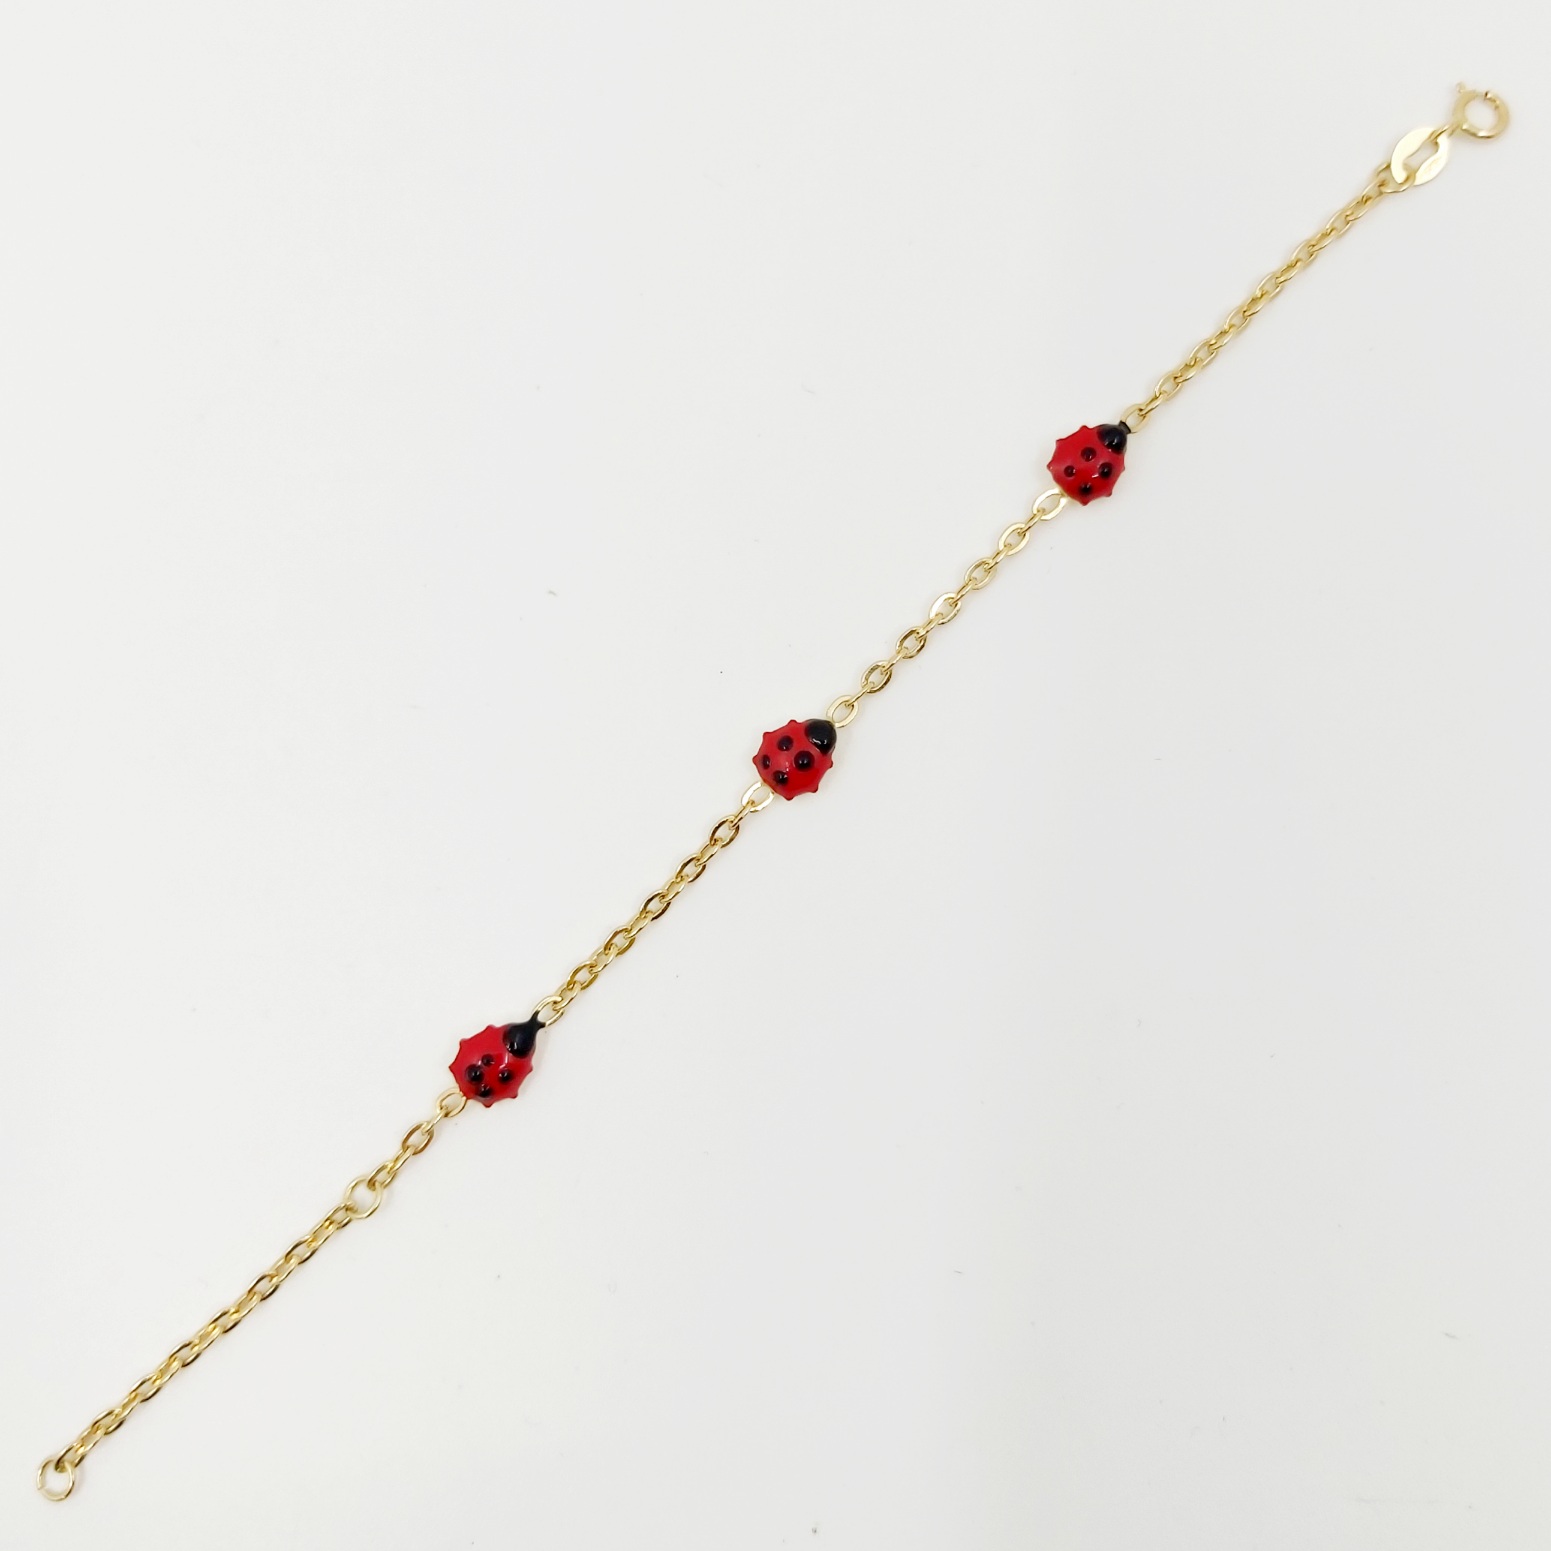 1 Armband 585/- , Emaille, Länge: 14,5 cm, 0,94 g